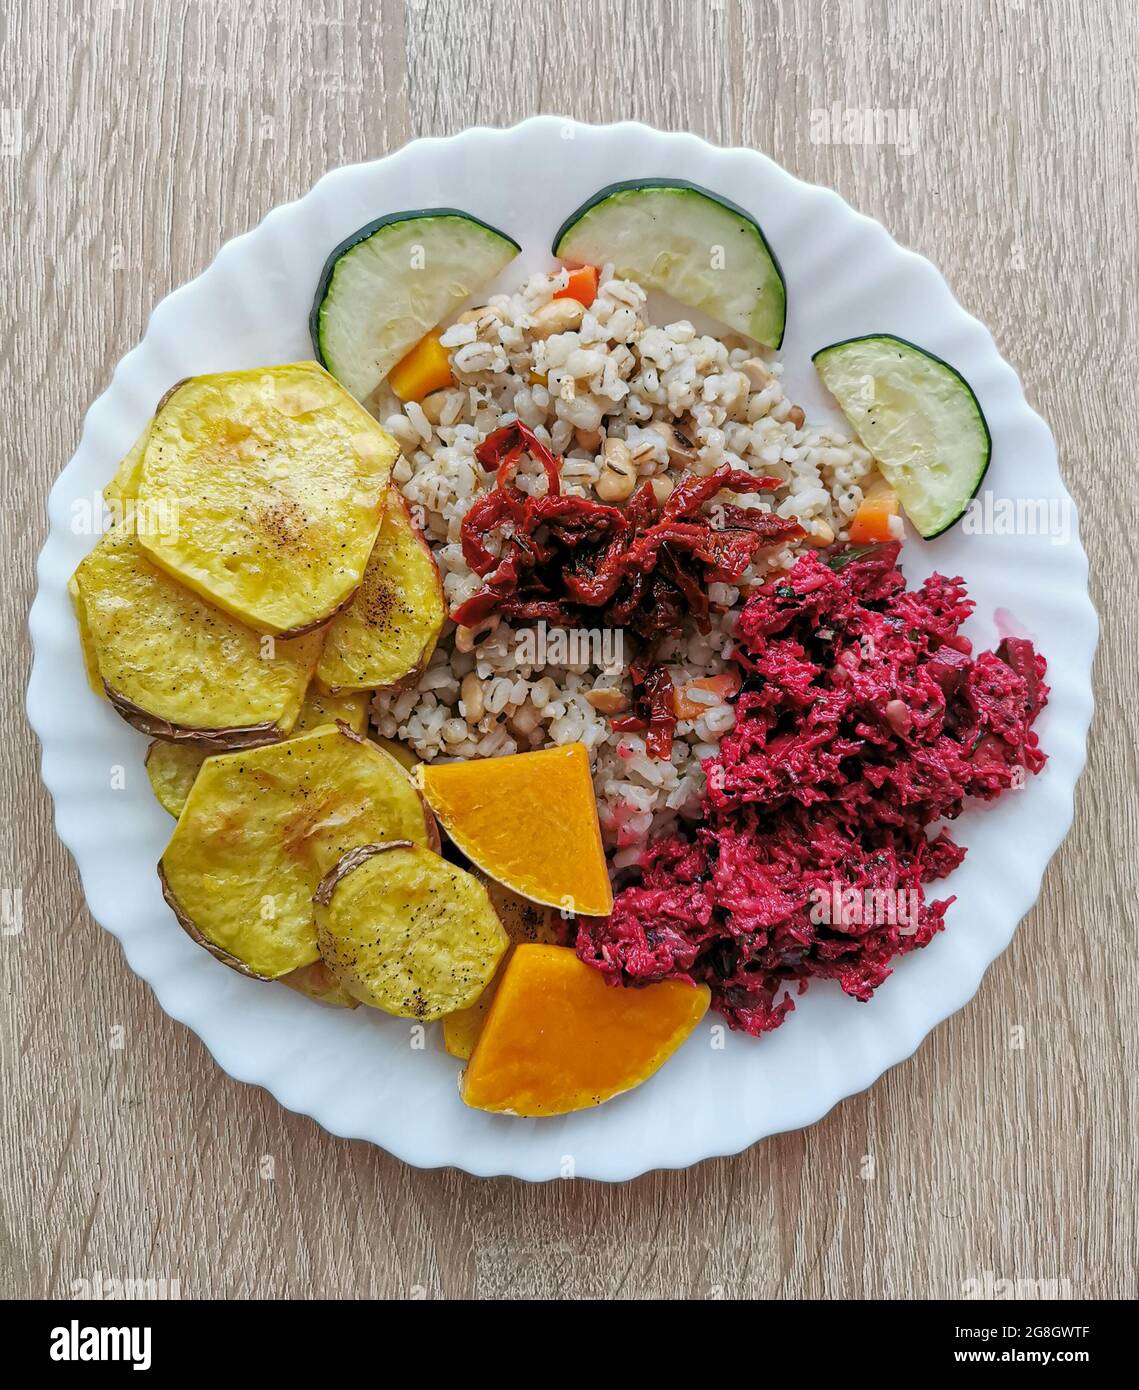 Pearl barley with soybeans, carrots, dried tomatoes. Baked potatoes, pumpkin and zucchini. Salad with beetroot Stock Photo